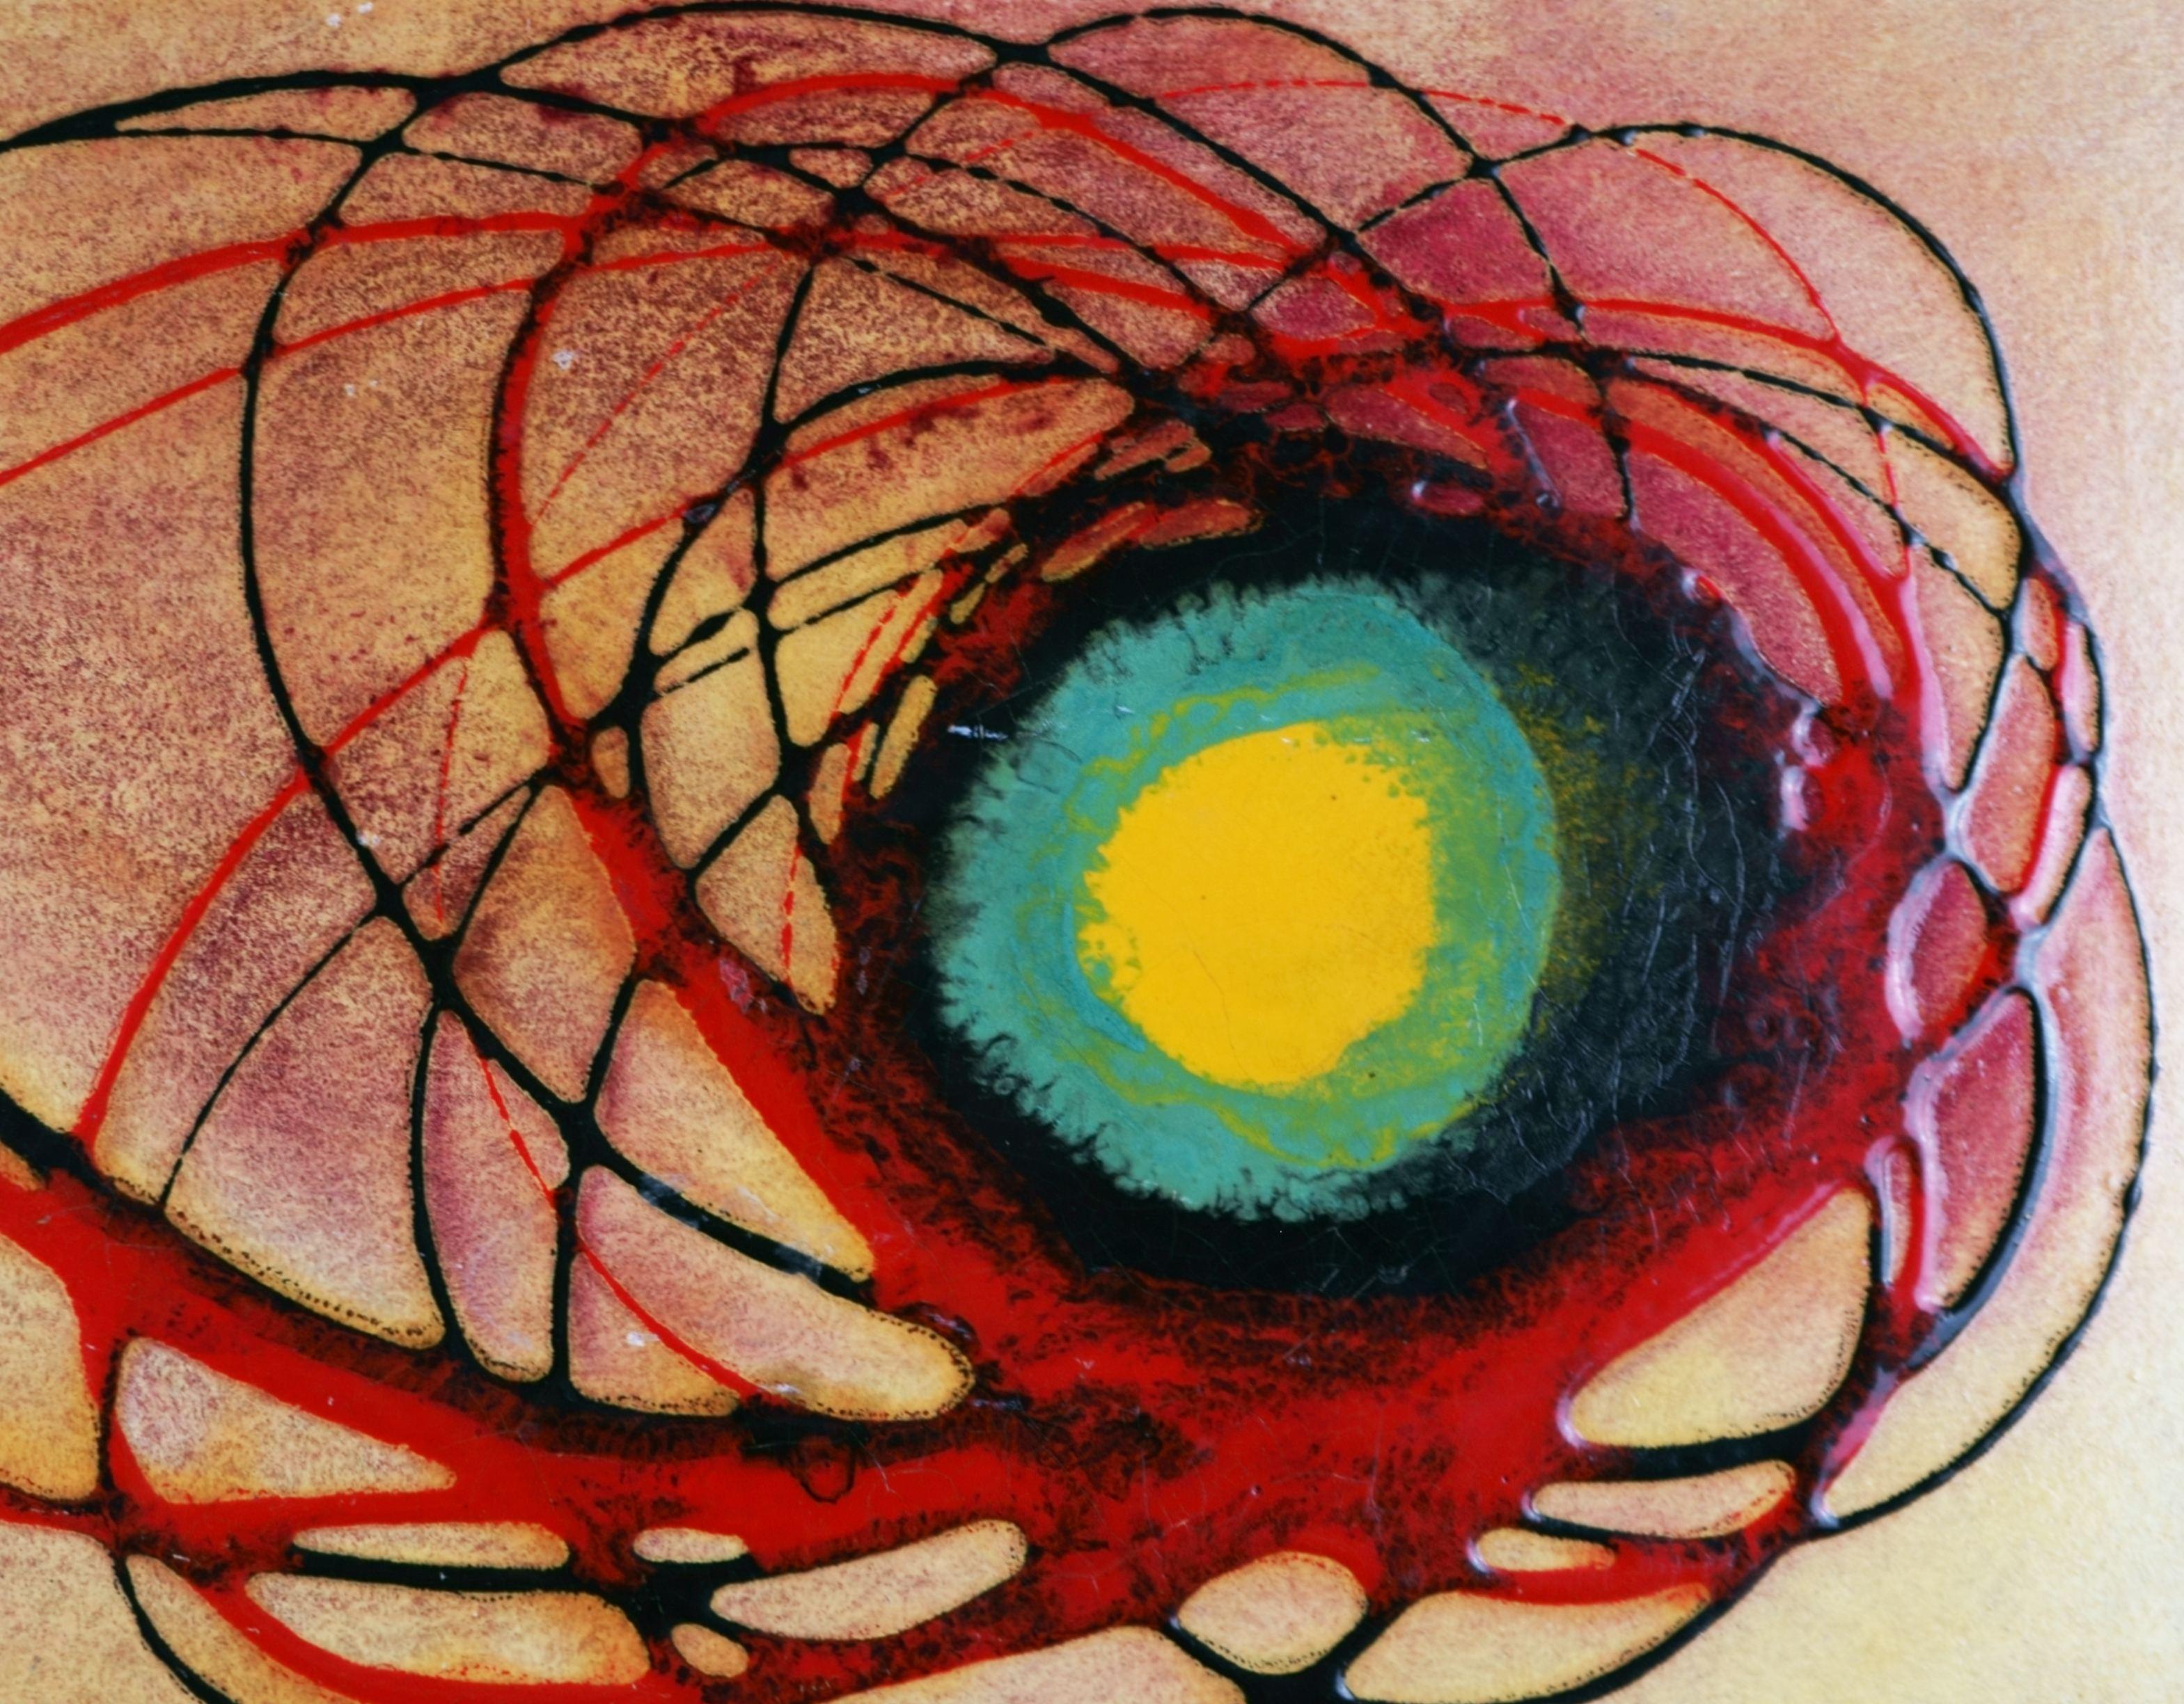 Eccentric discharges of a turquoise-yellow core / - Energetic traces - - Painting by Klaus Oldenburg